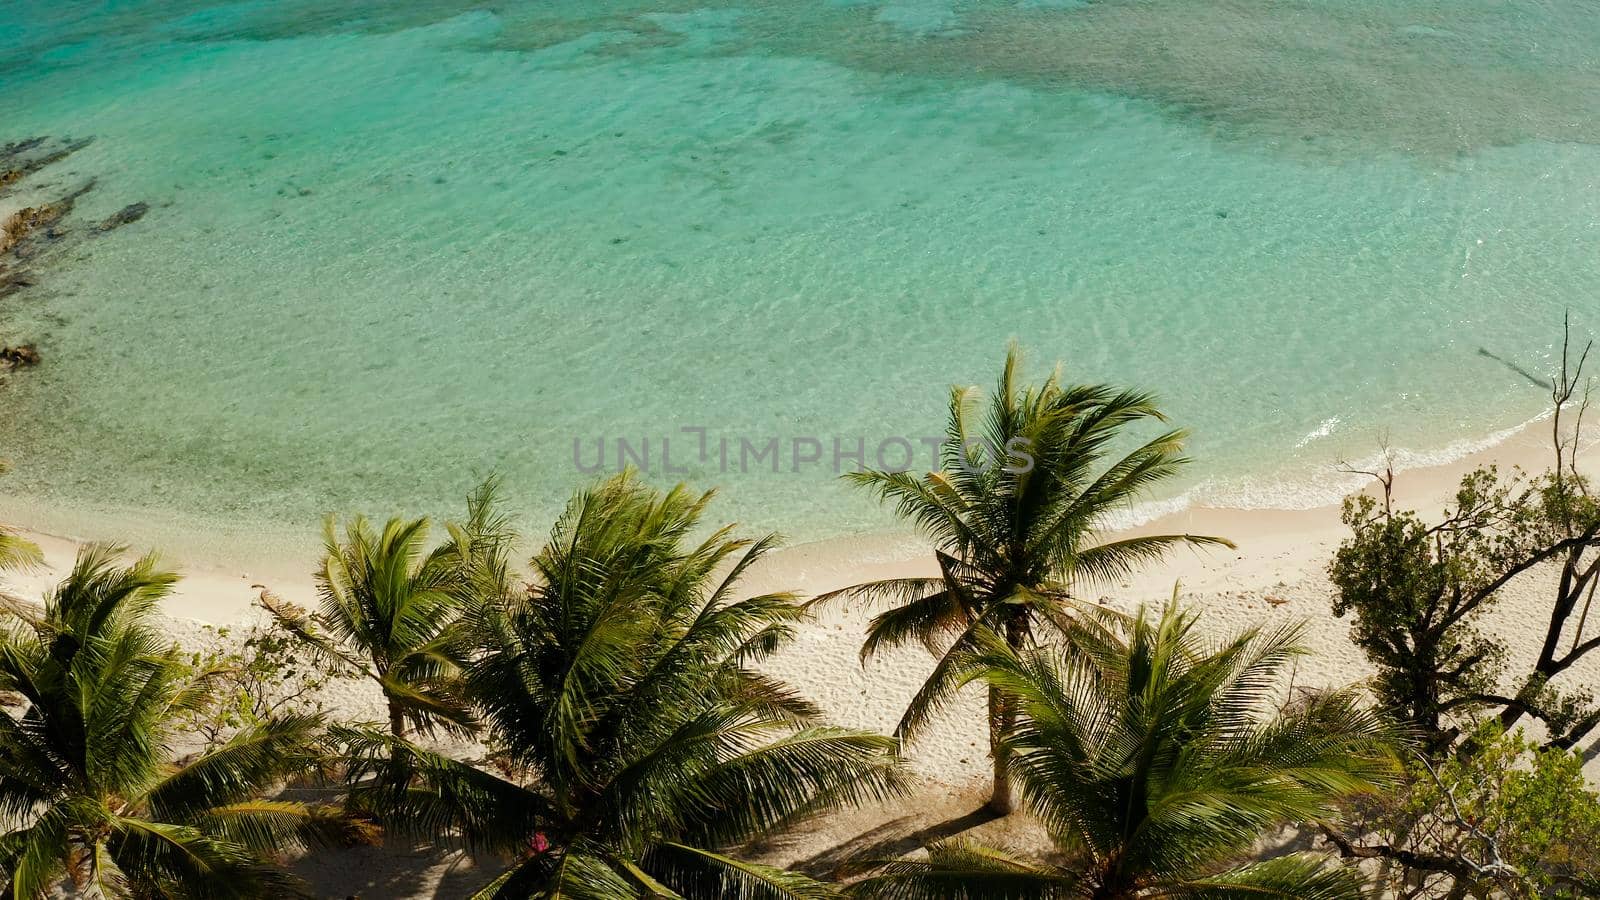 aerial view sandy beach on tropical island with palm trees and clear blue water. Malcapuya, Philippines, Palawan. Tropical landscape with blue lagoon